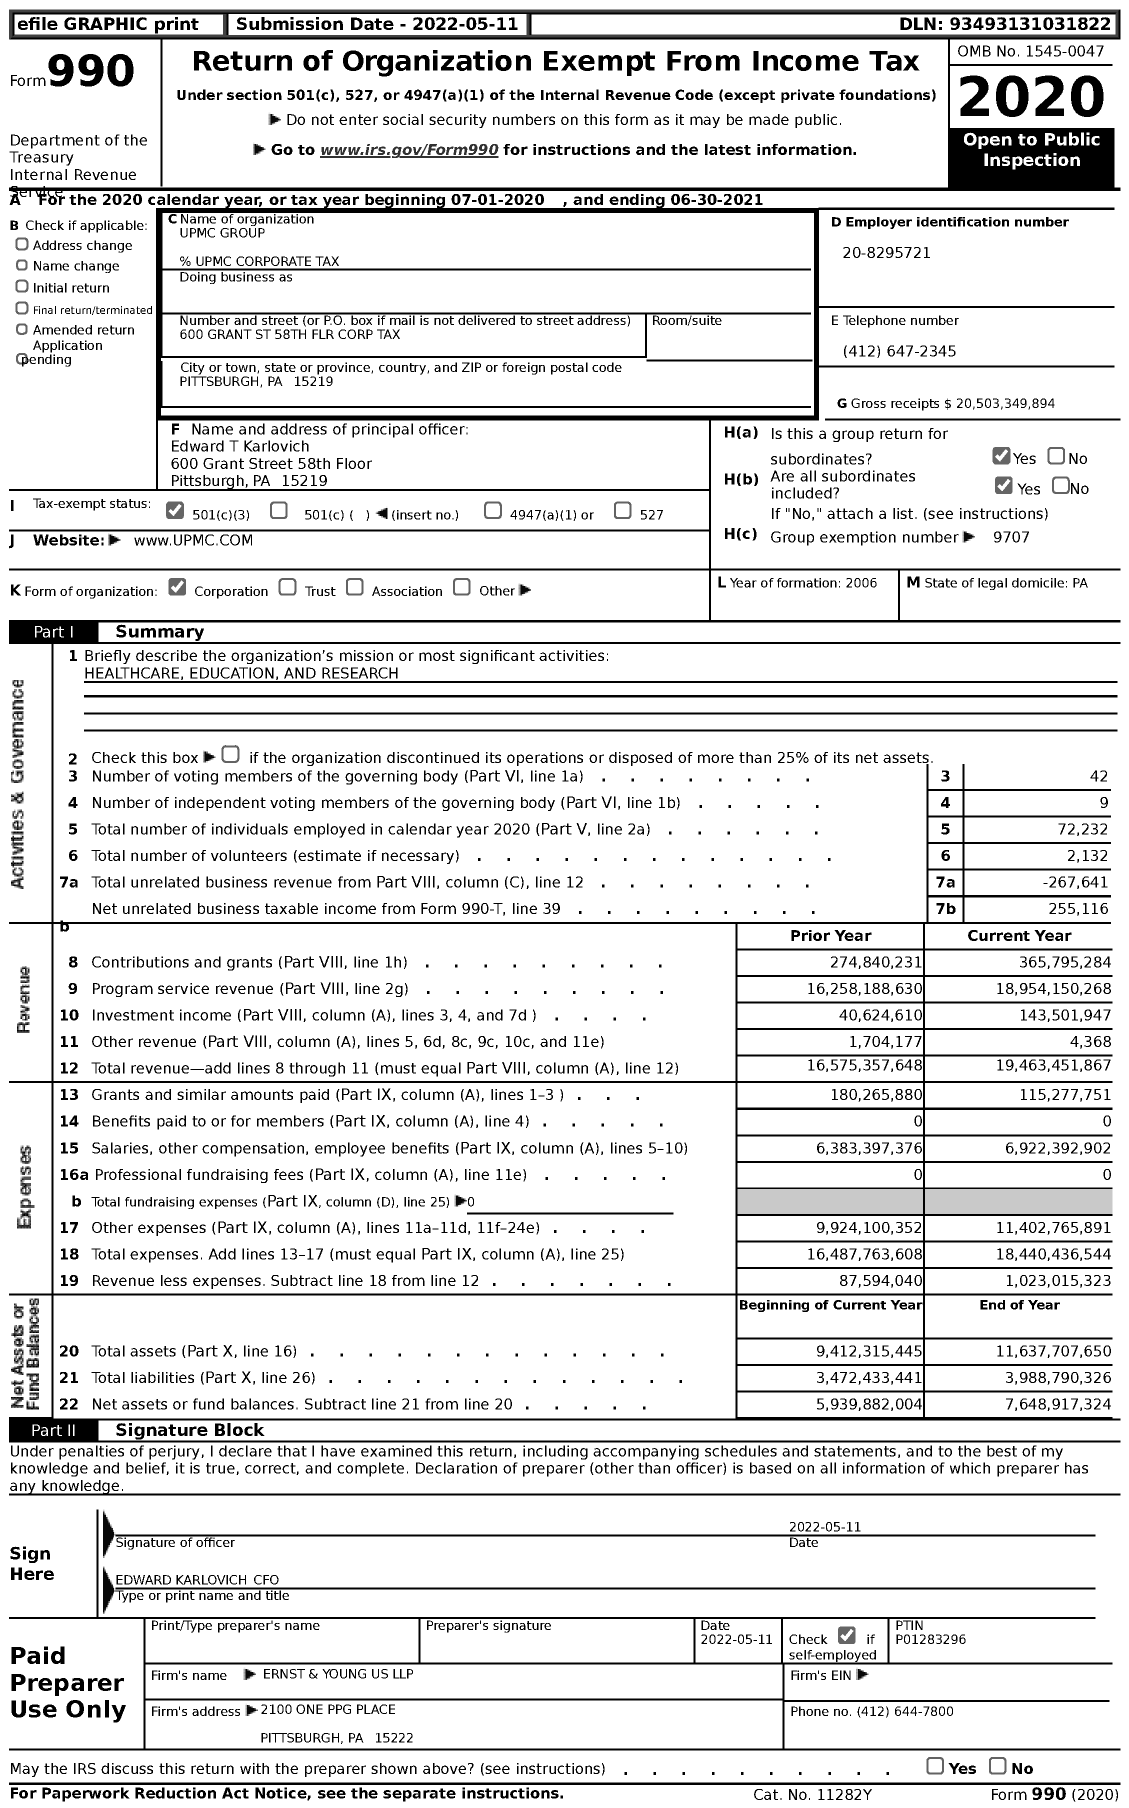 Image of first page of 2020 Form 990 for Upmc Group